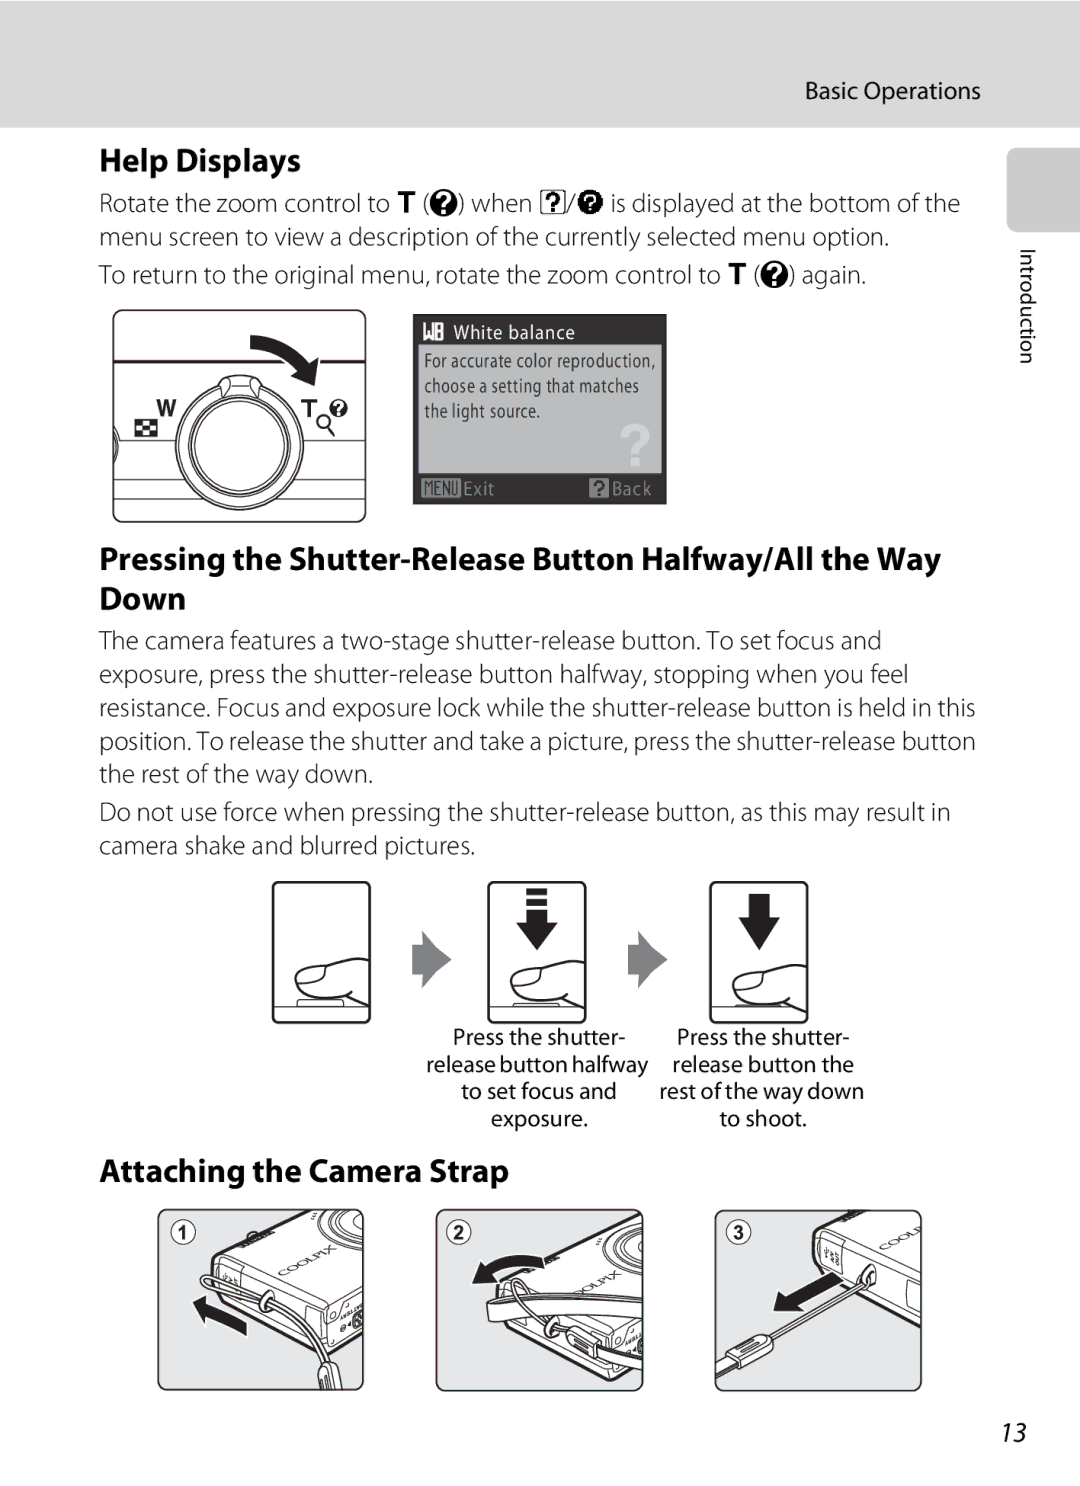 Nortel Networks S640 user manual Help Displays, Attaching the Camera Strap 